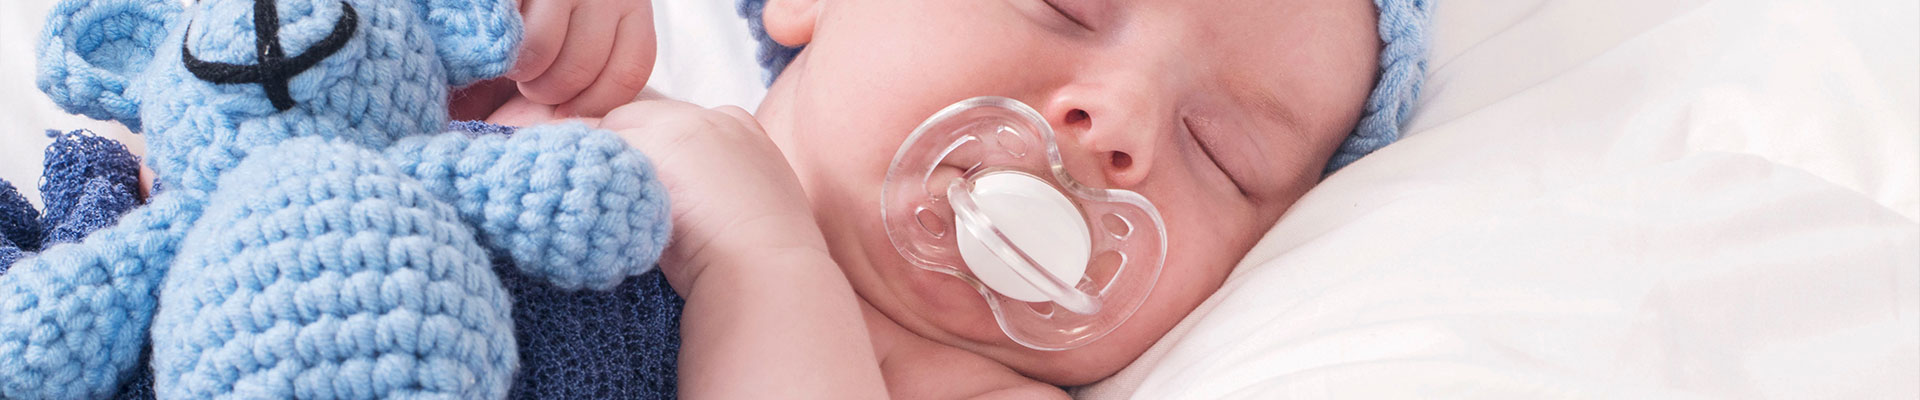 Should I Remove The Pacifier When The Baby Is Sleeping?